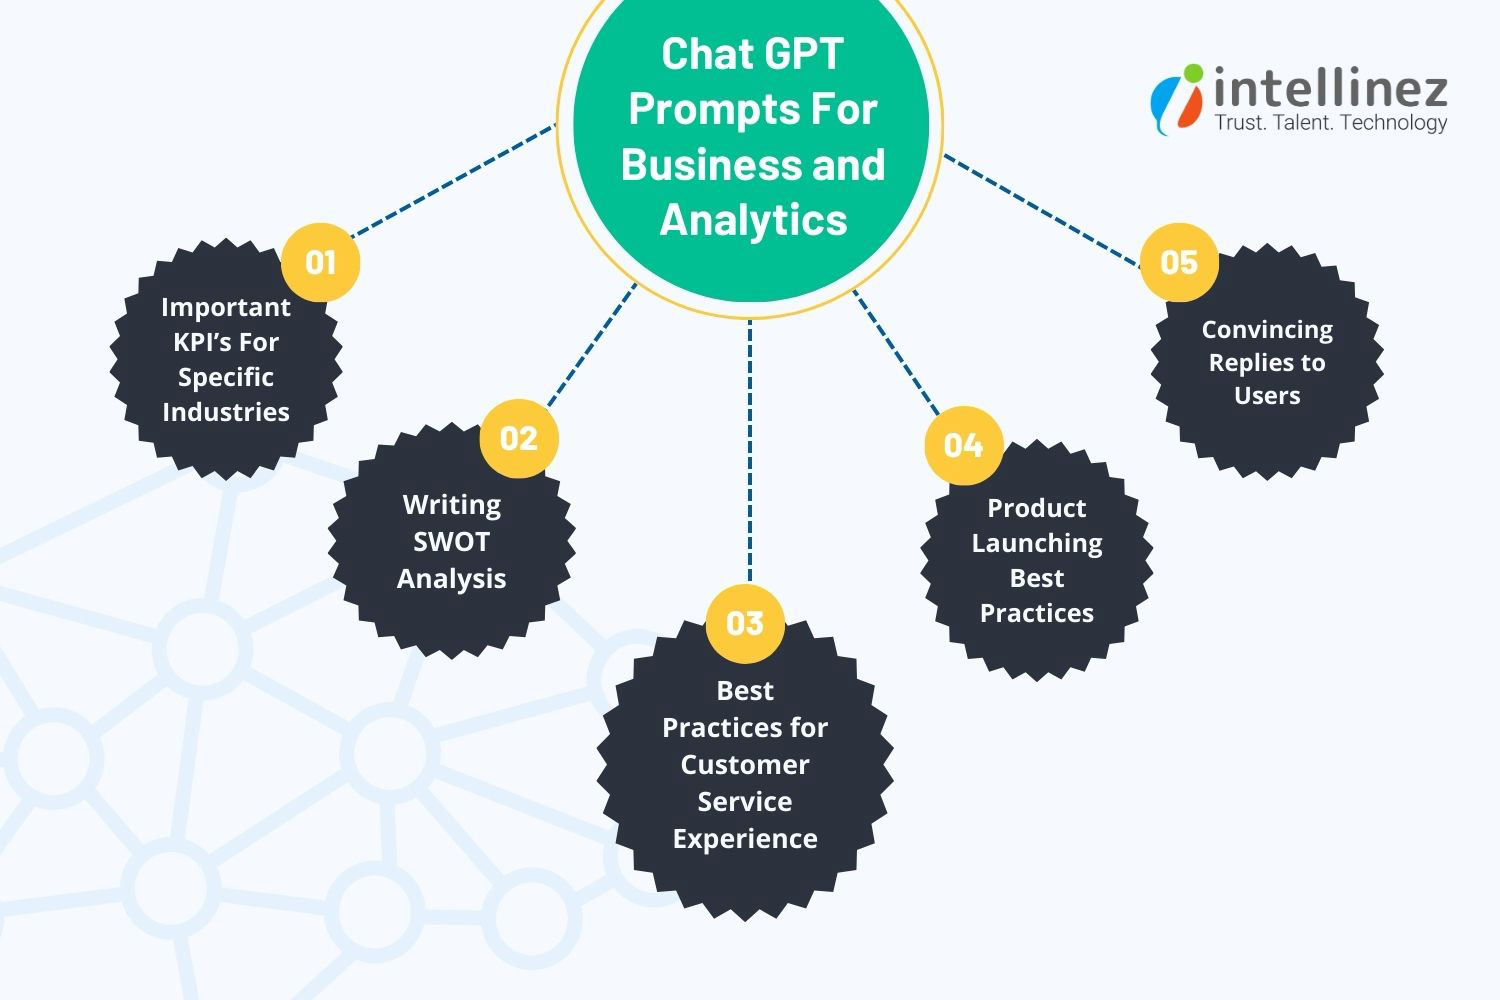 ChatGPT Prompts For Business & Analytics